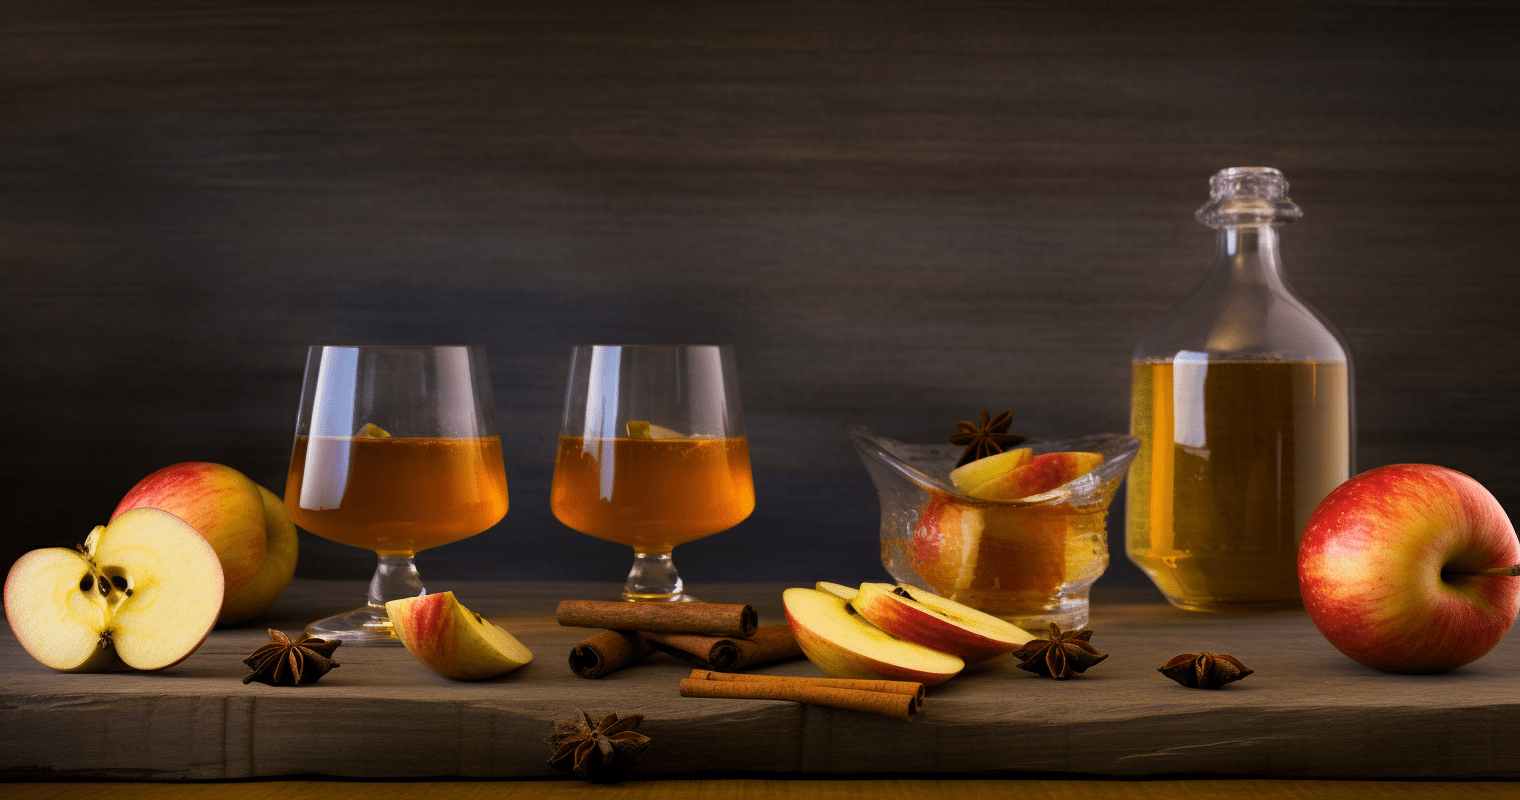 title: A Taste of Autumn: The Irresistible Apple Cider Recipe